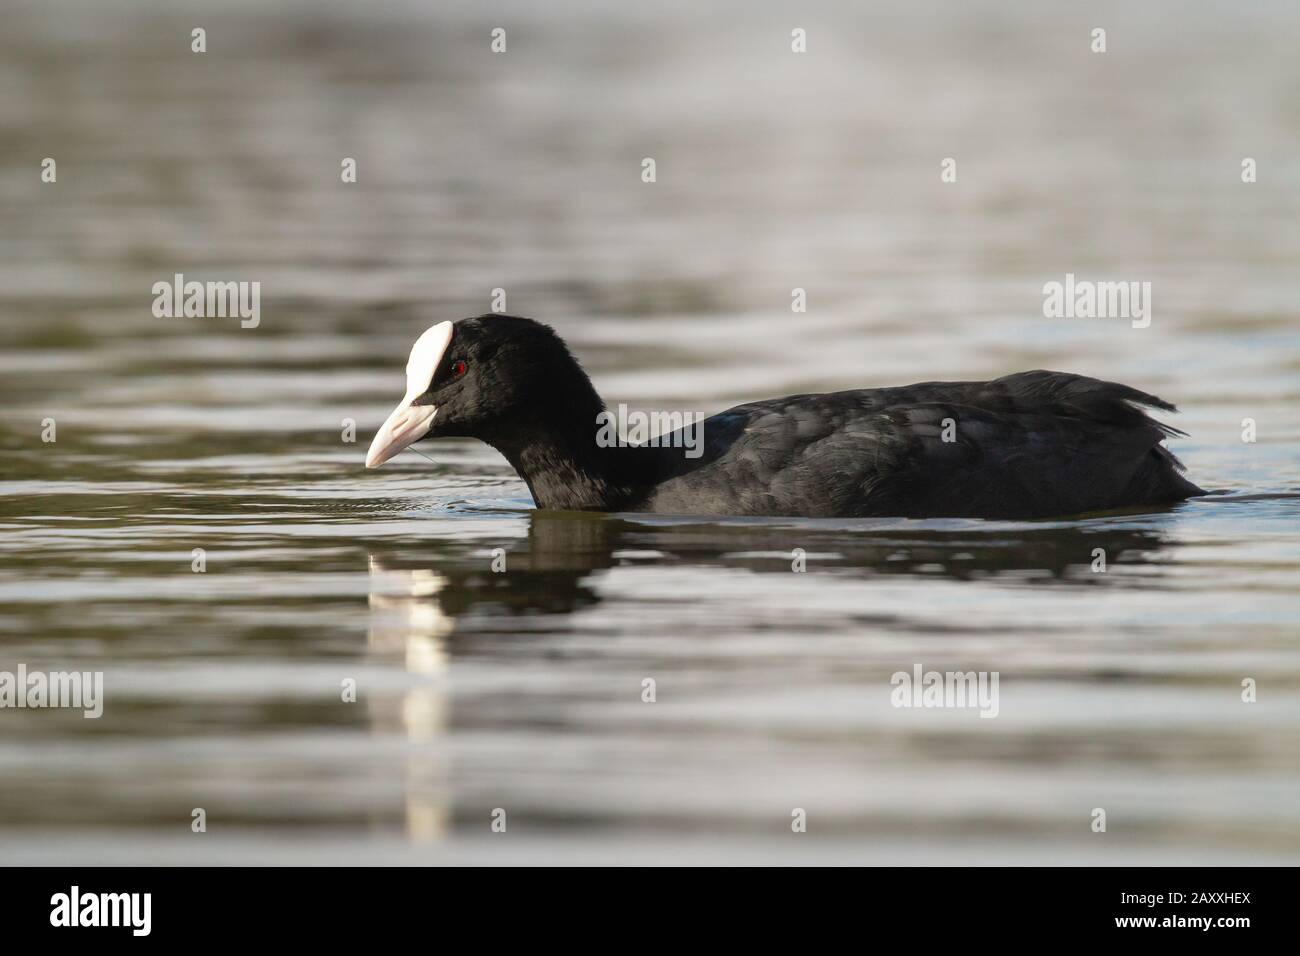 A coot (Fulica atra) swimming in a lake in London Stock Photo